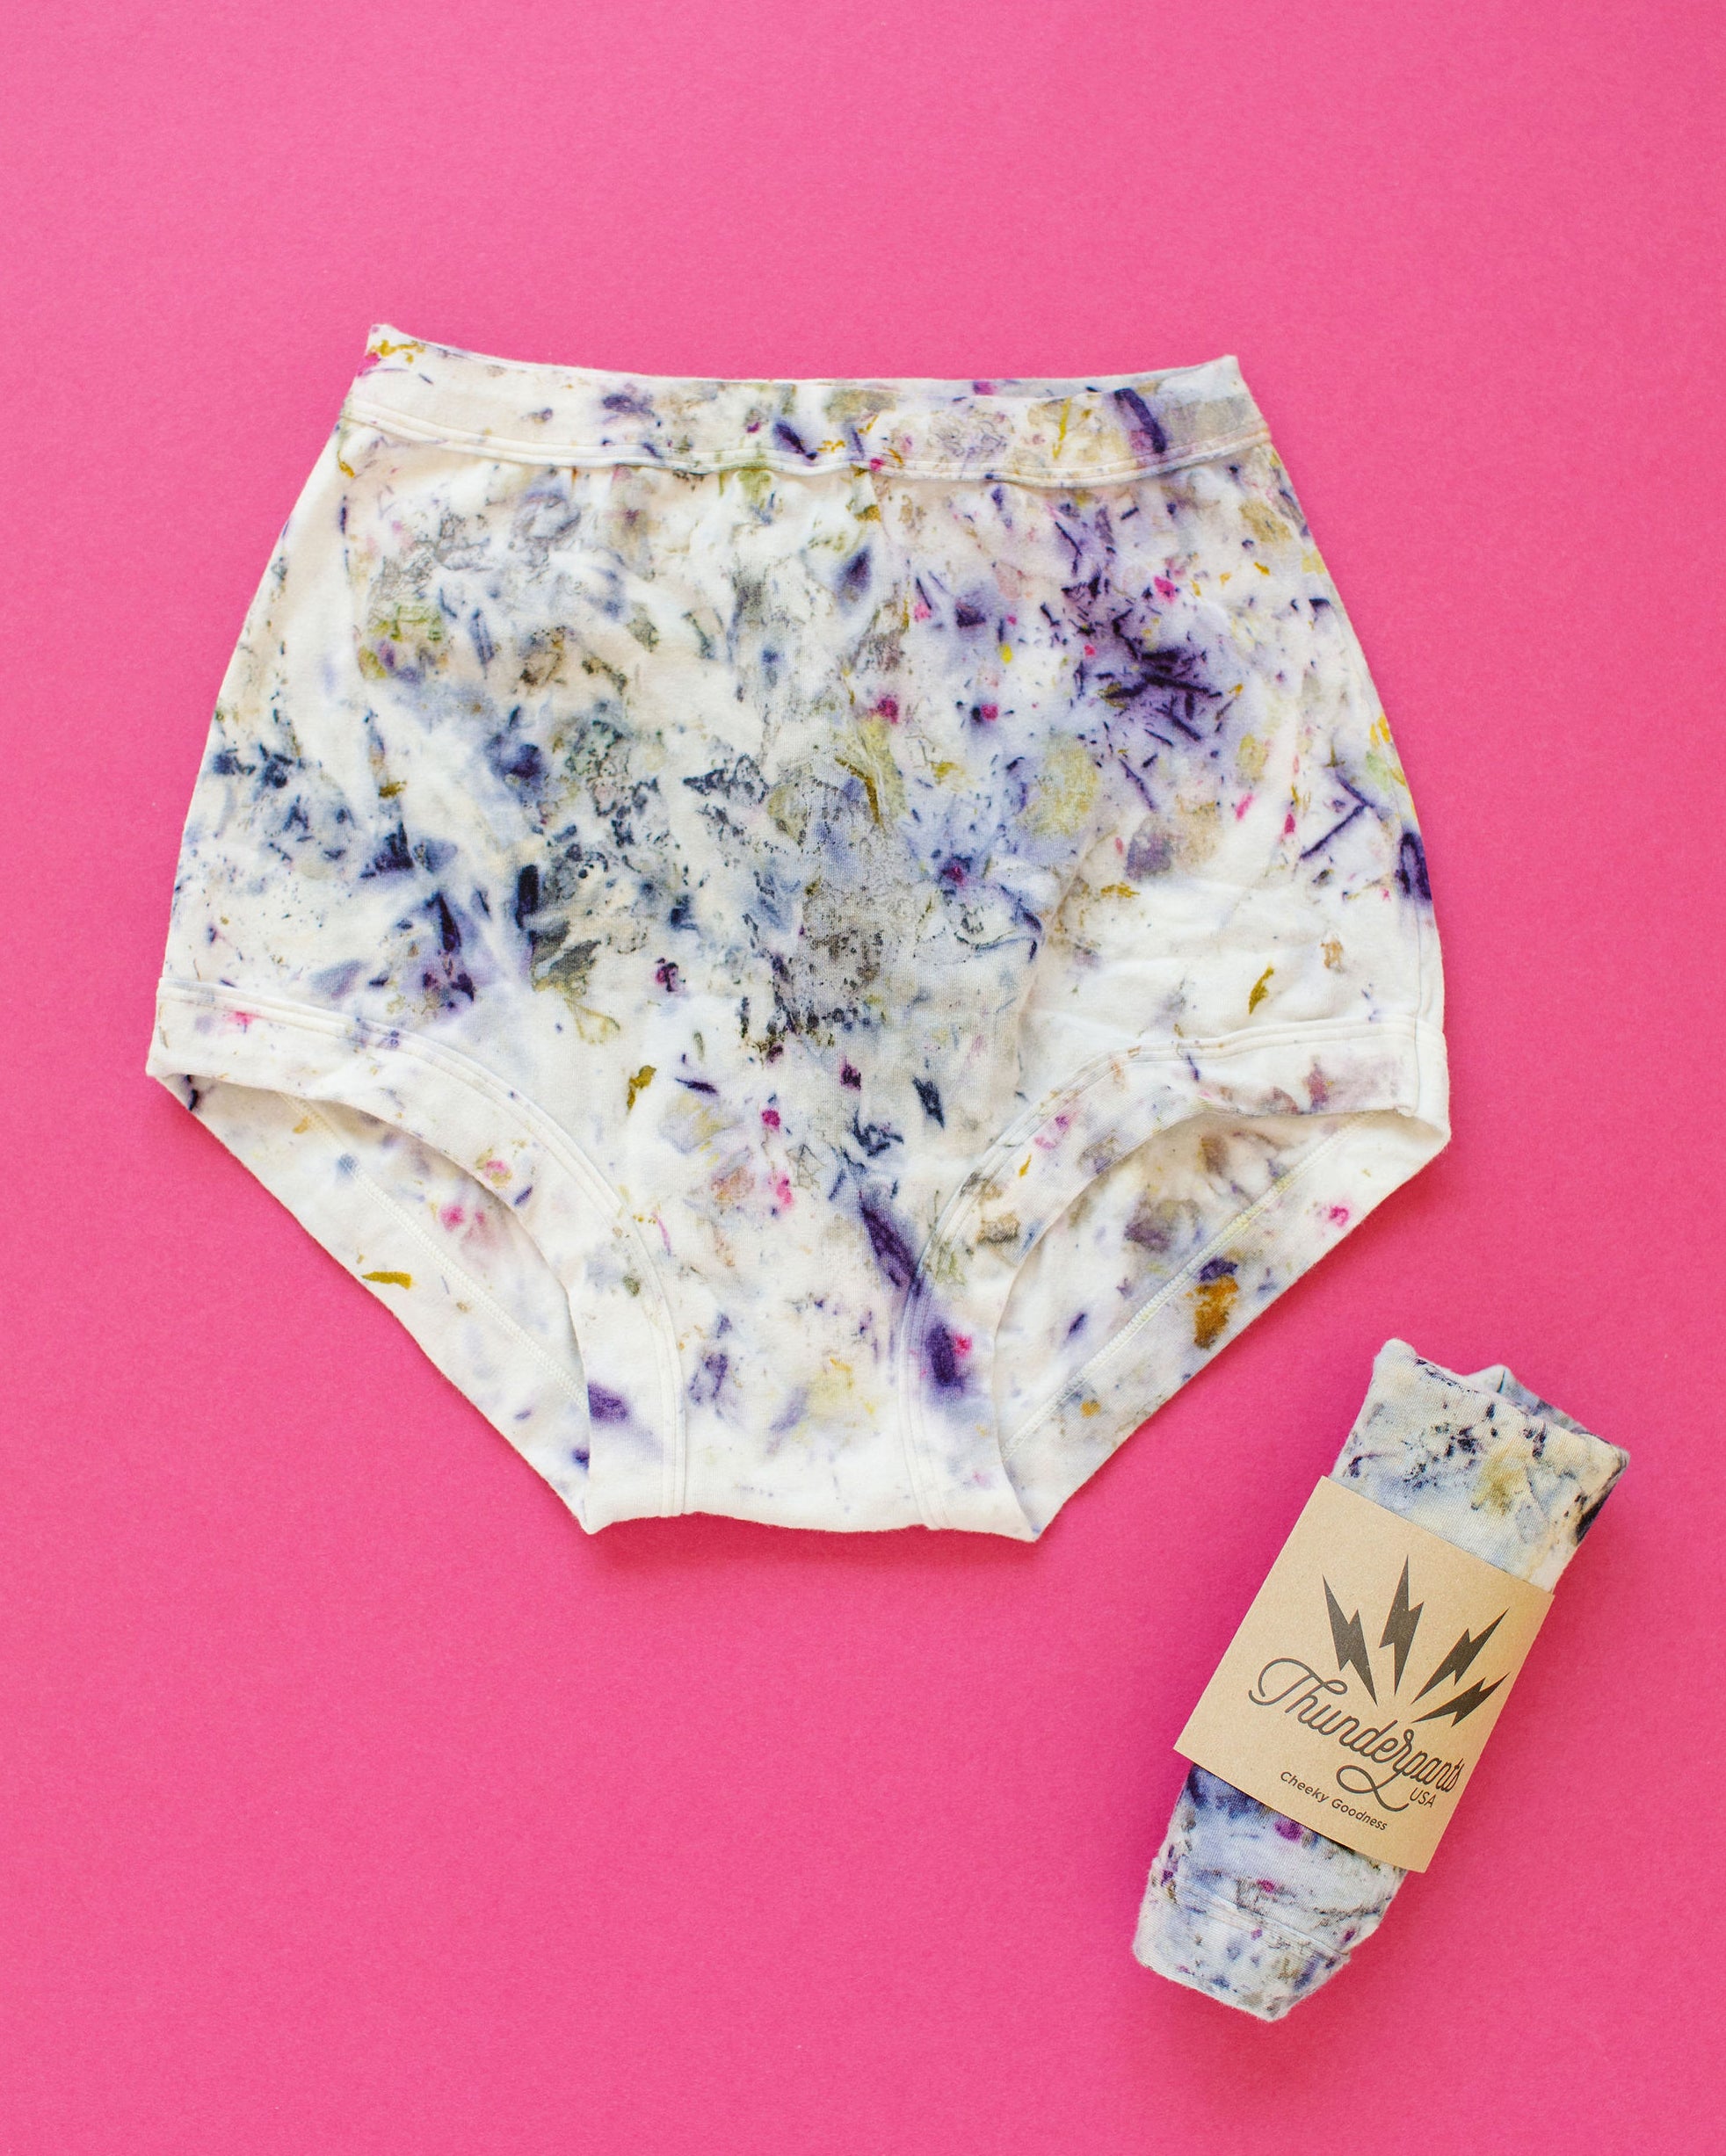 Flat lay of Thunderpants Sky Rise style underwear in Cosmic Compost hand dye.